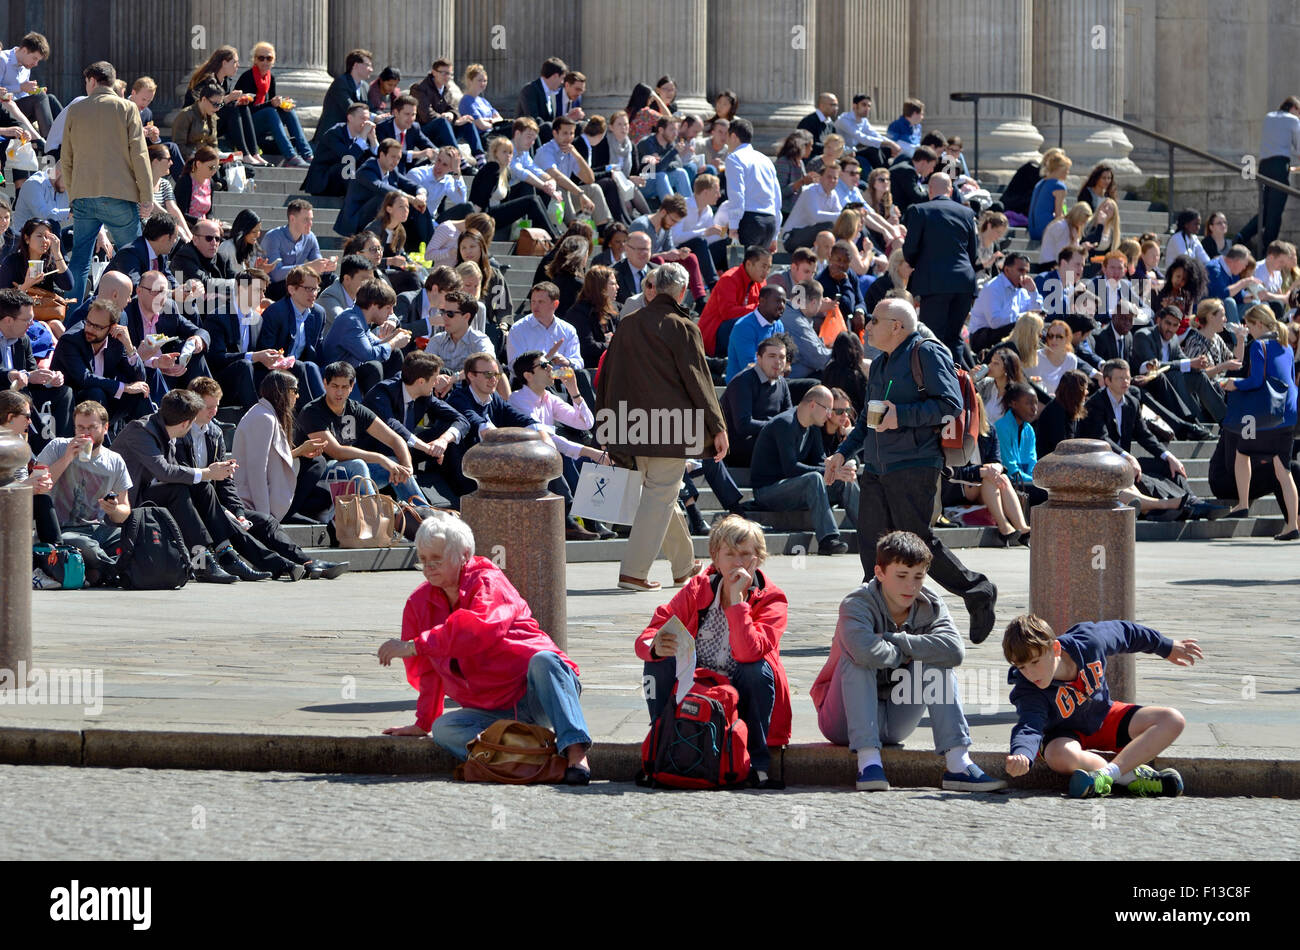 London, England, UK. People sitting in the sun on the steps of St Paul's Cathedral Stock Photo